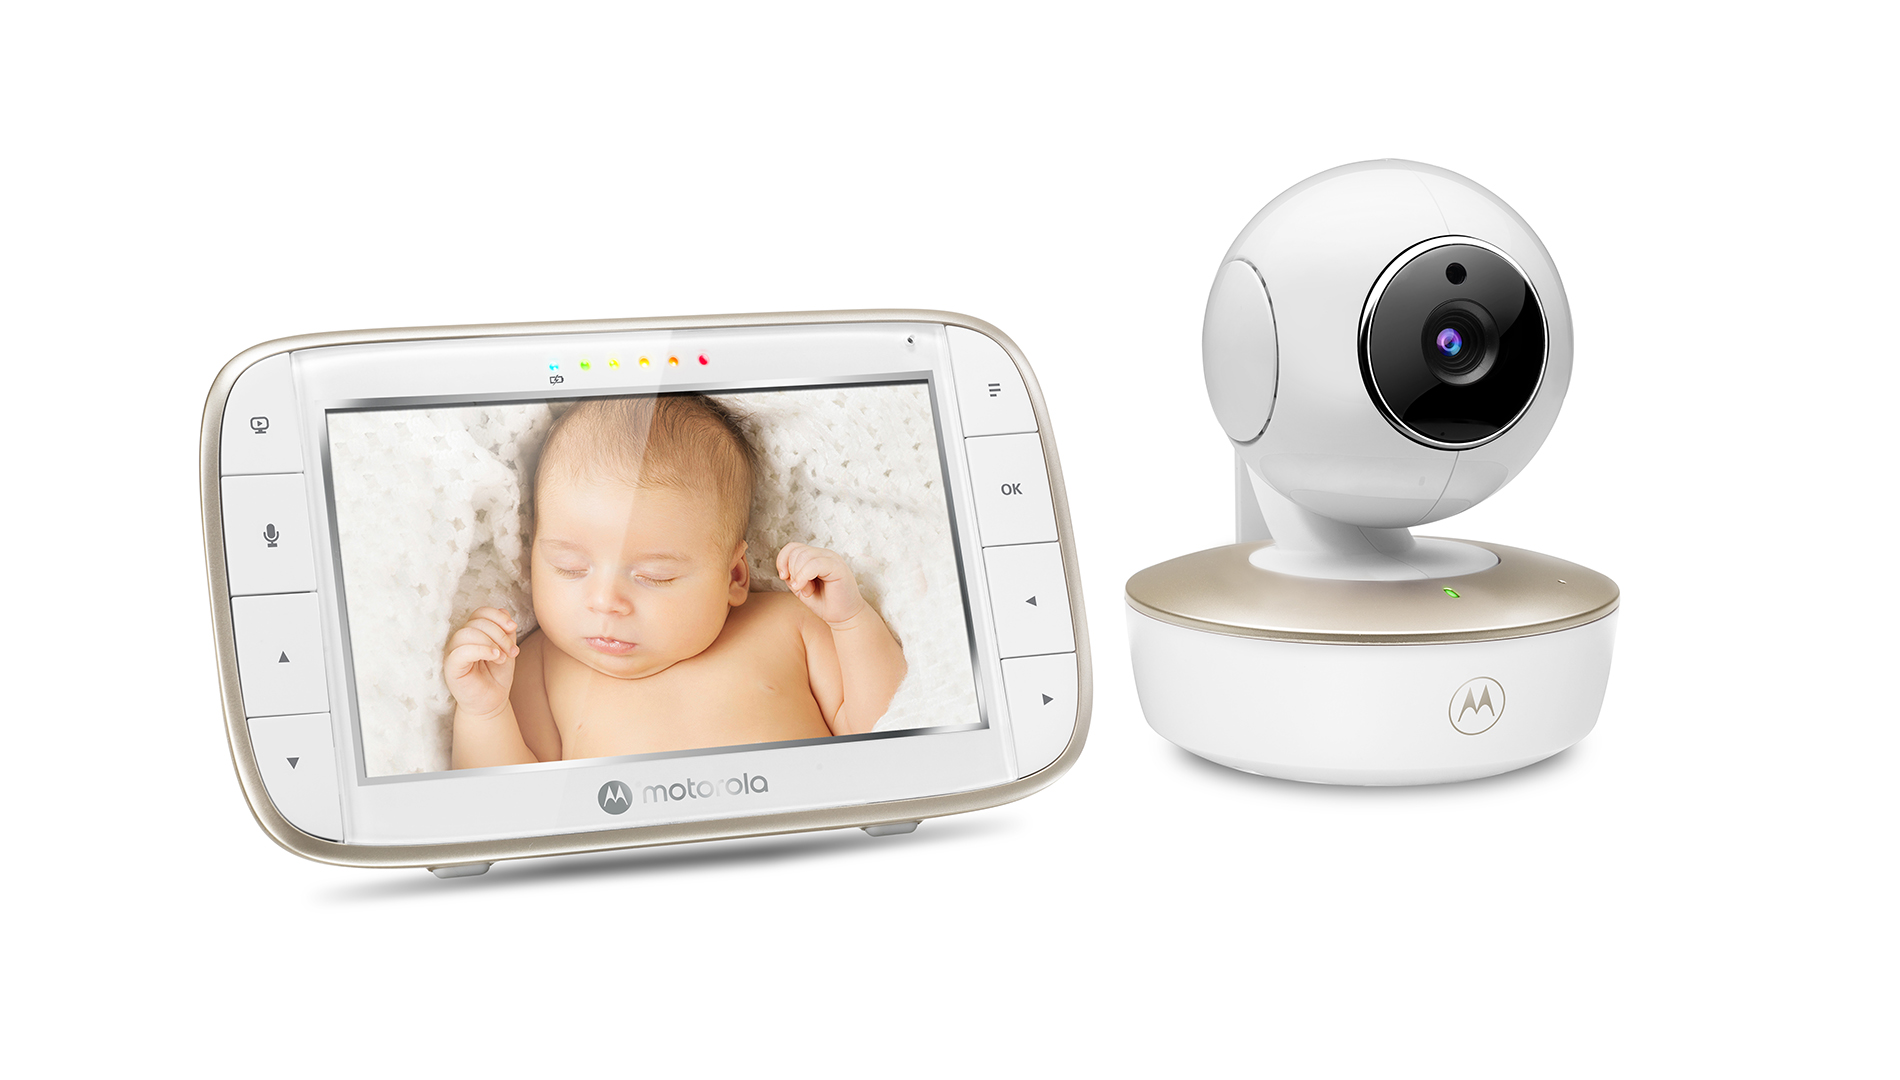 VM855 Connect 5 Inch Portable Video Baby Monitor - right side - Product image